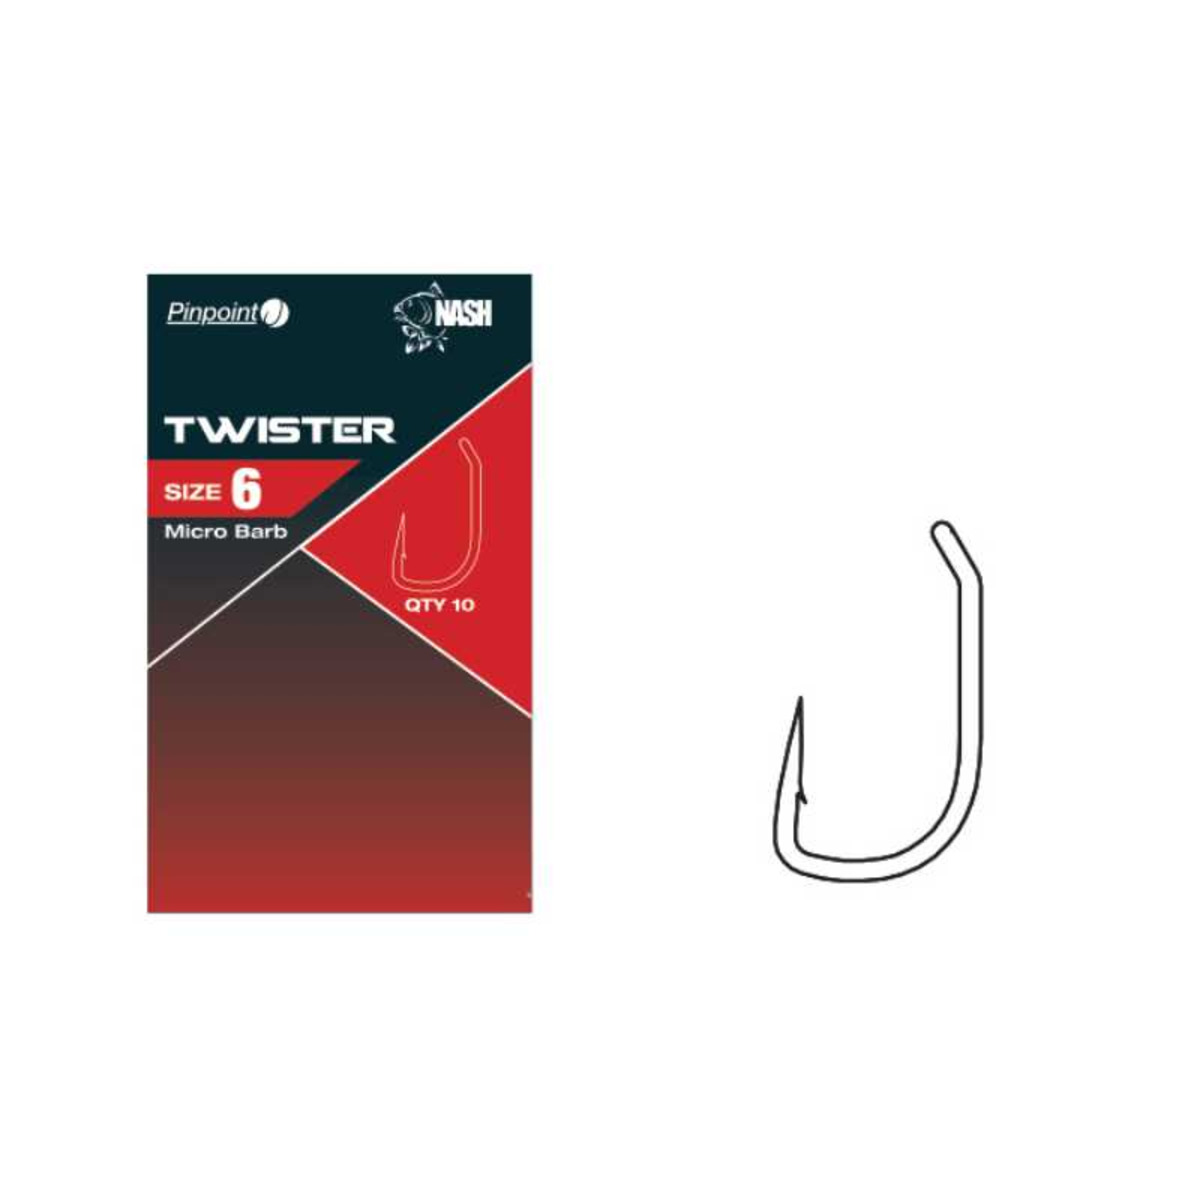 Nash Twister - Size 6 Micro Barbed